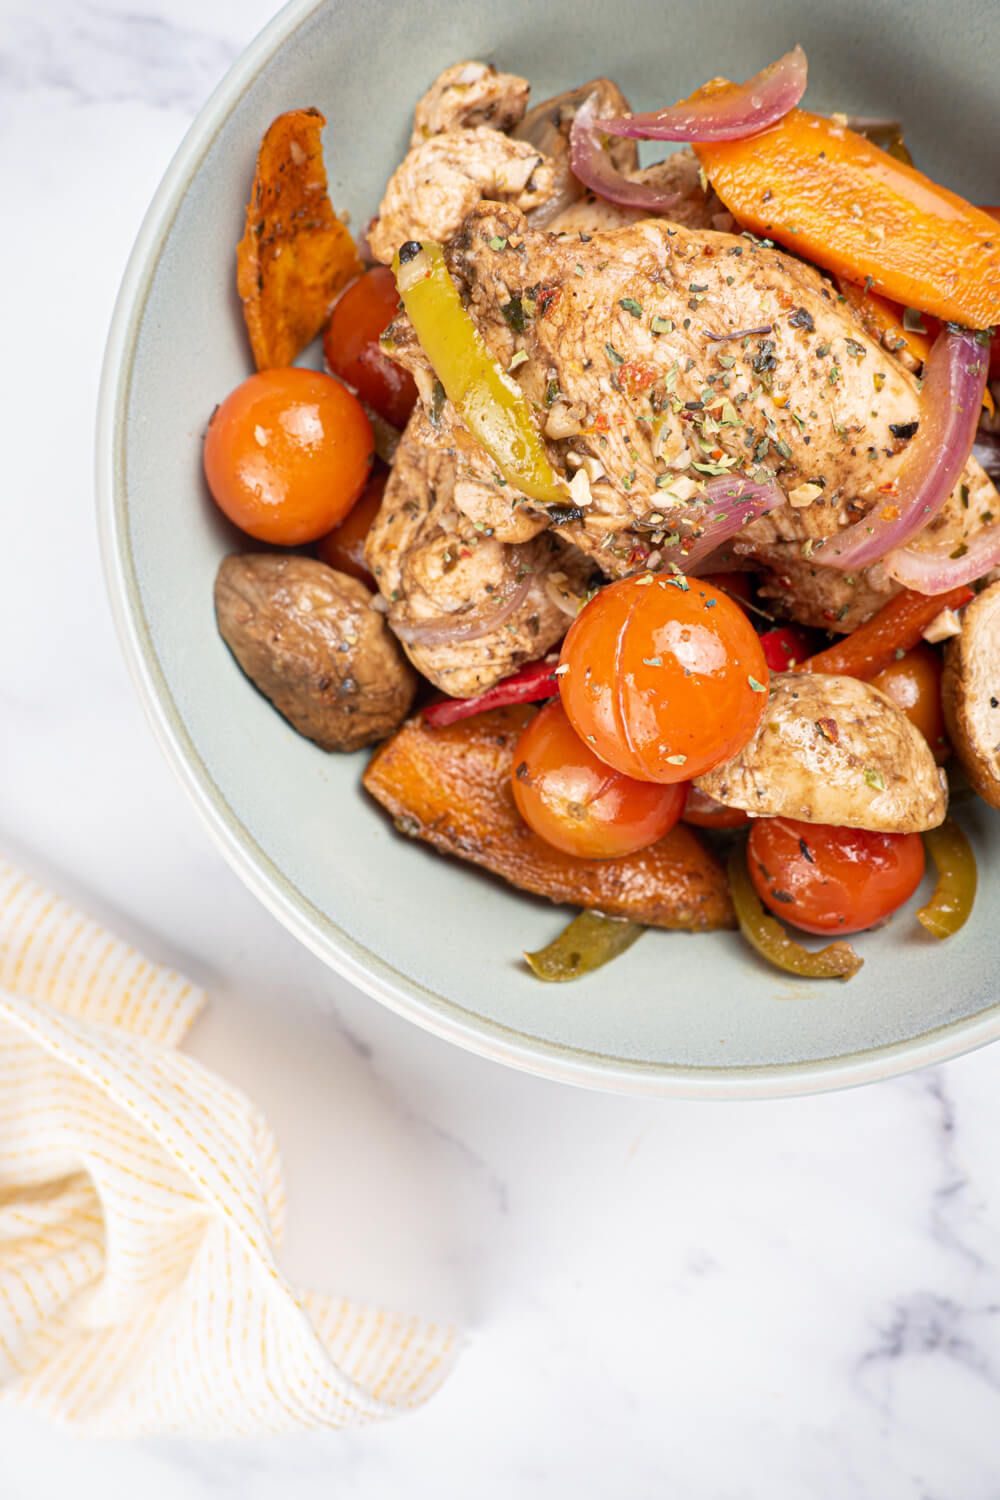 Balsamic chicken in a bowl with cherry tomatoes, mushrooms, carrots, and peppers.